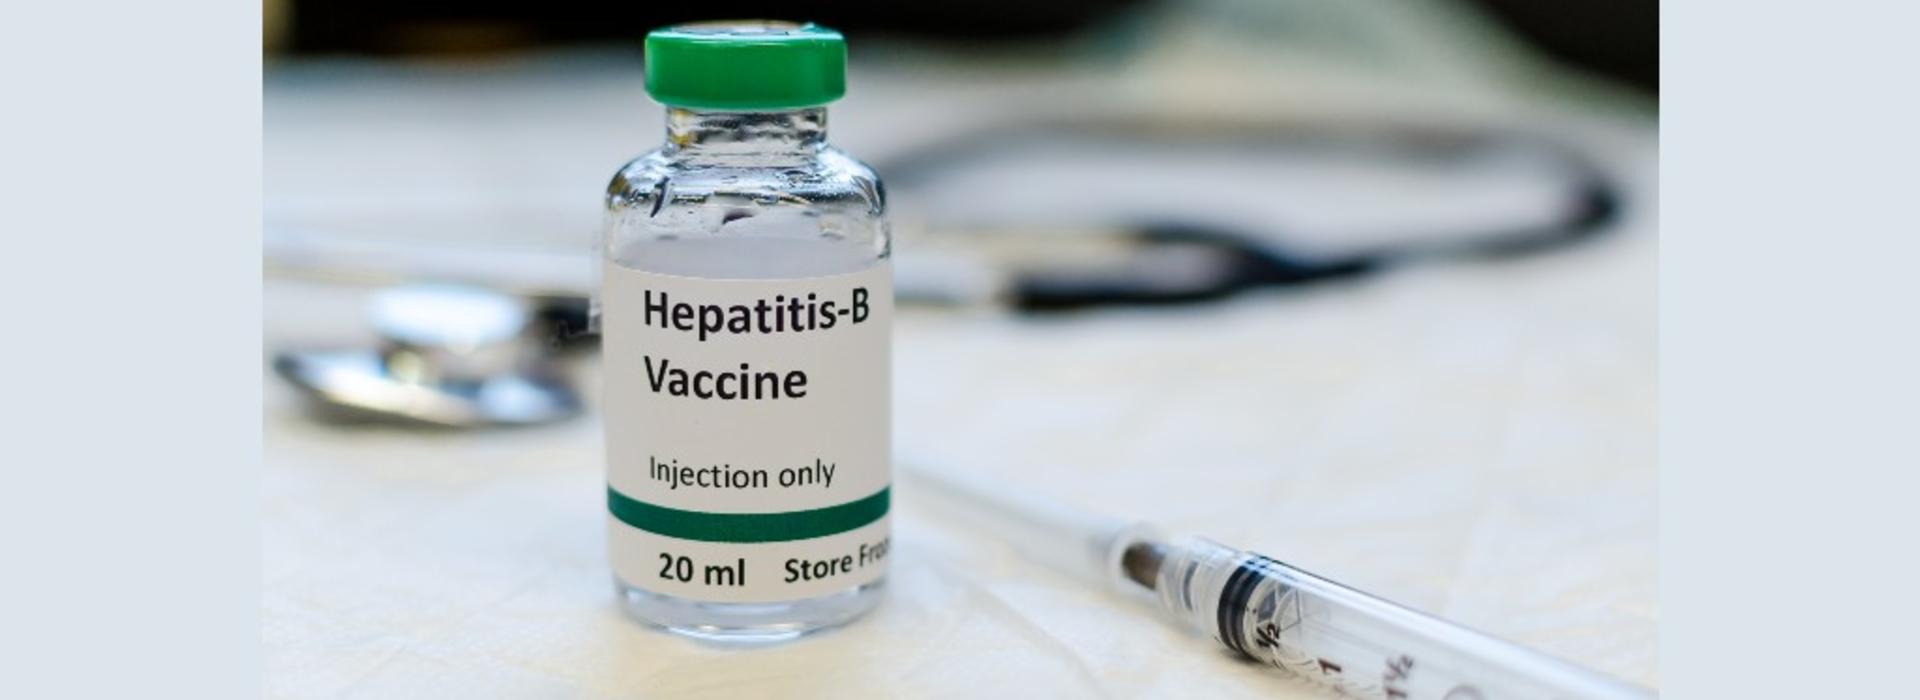 hepatitis B vaccine vial with syringe and stethoscope in the background